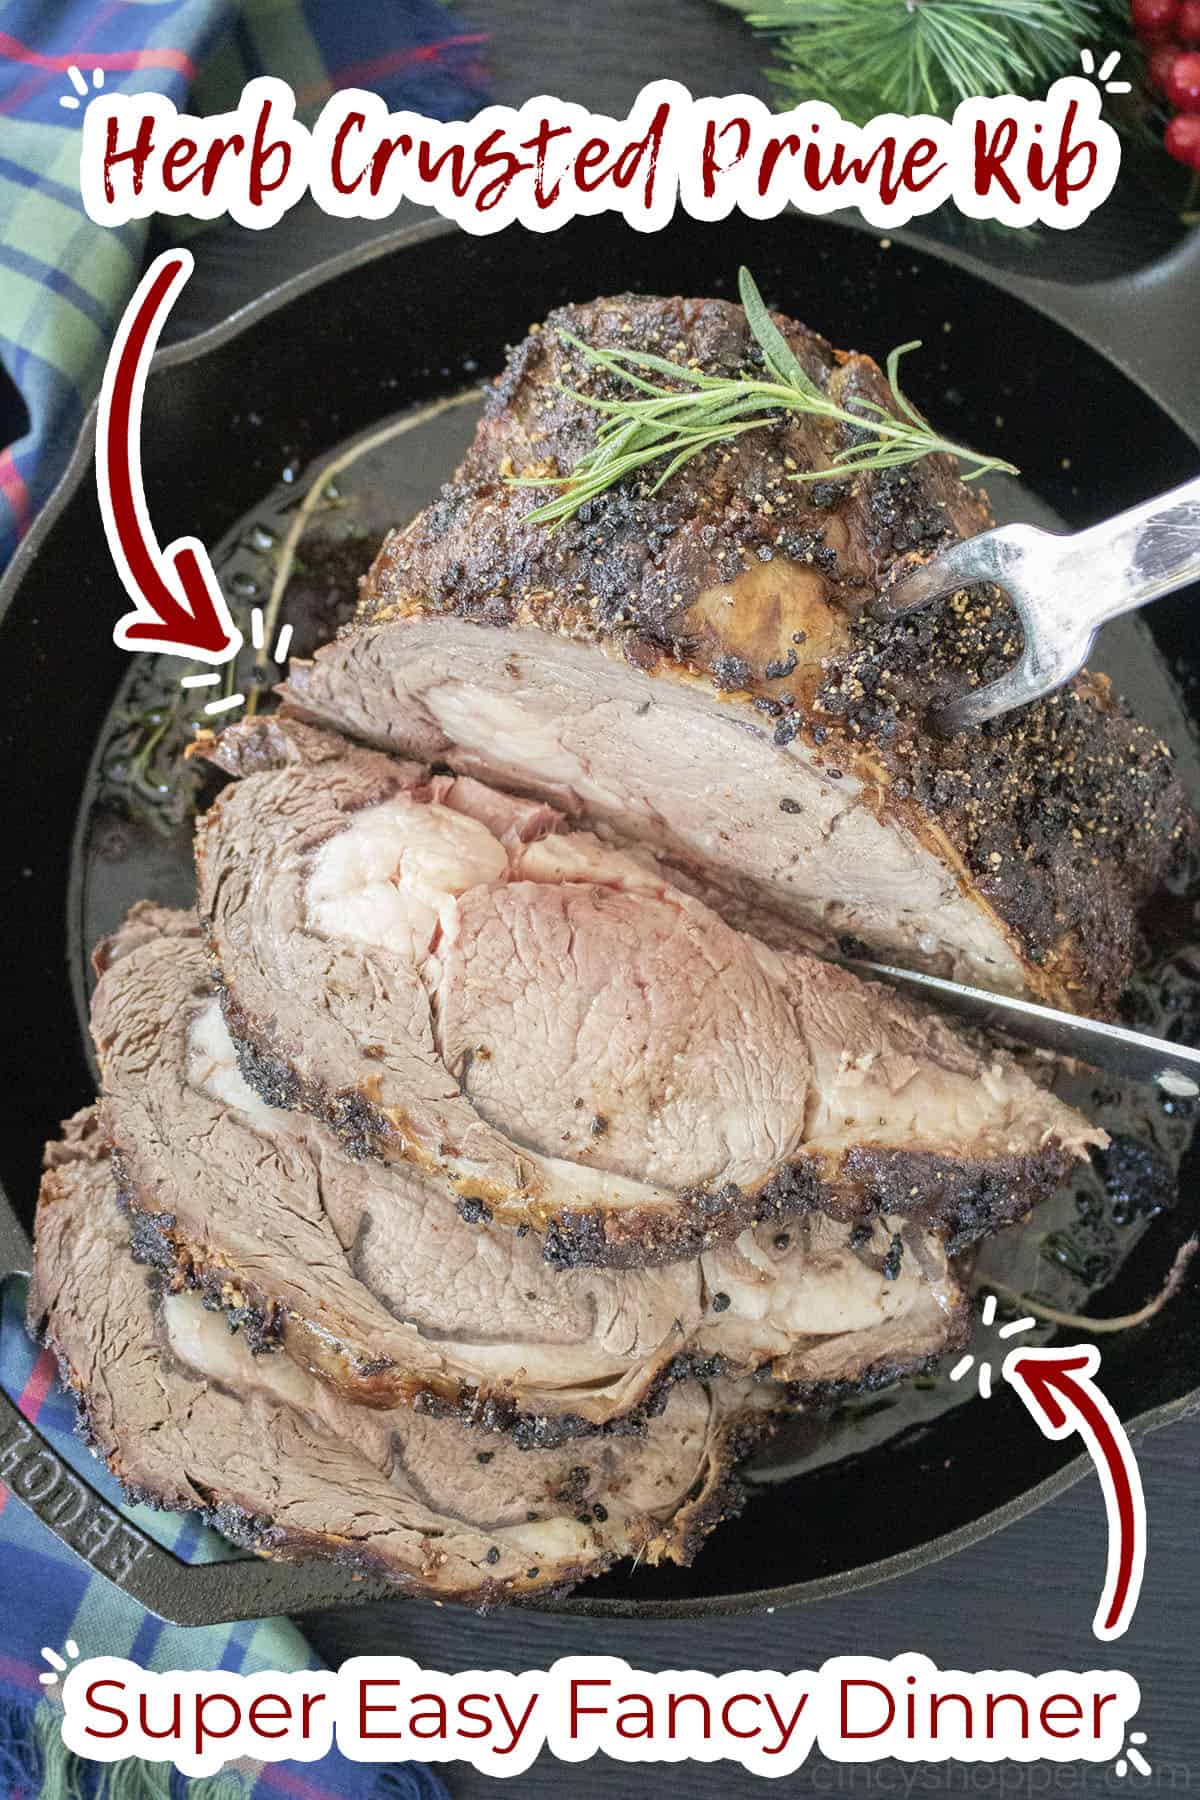 Text on image Herb Crusted Prime Rib Super Easy Fancy Dinner